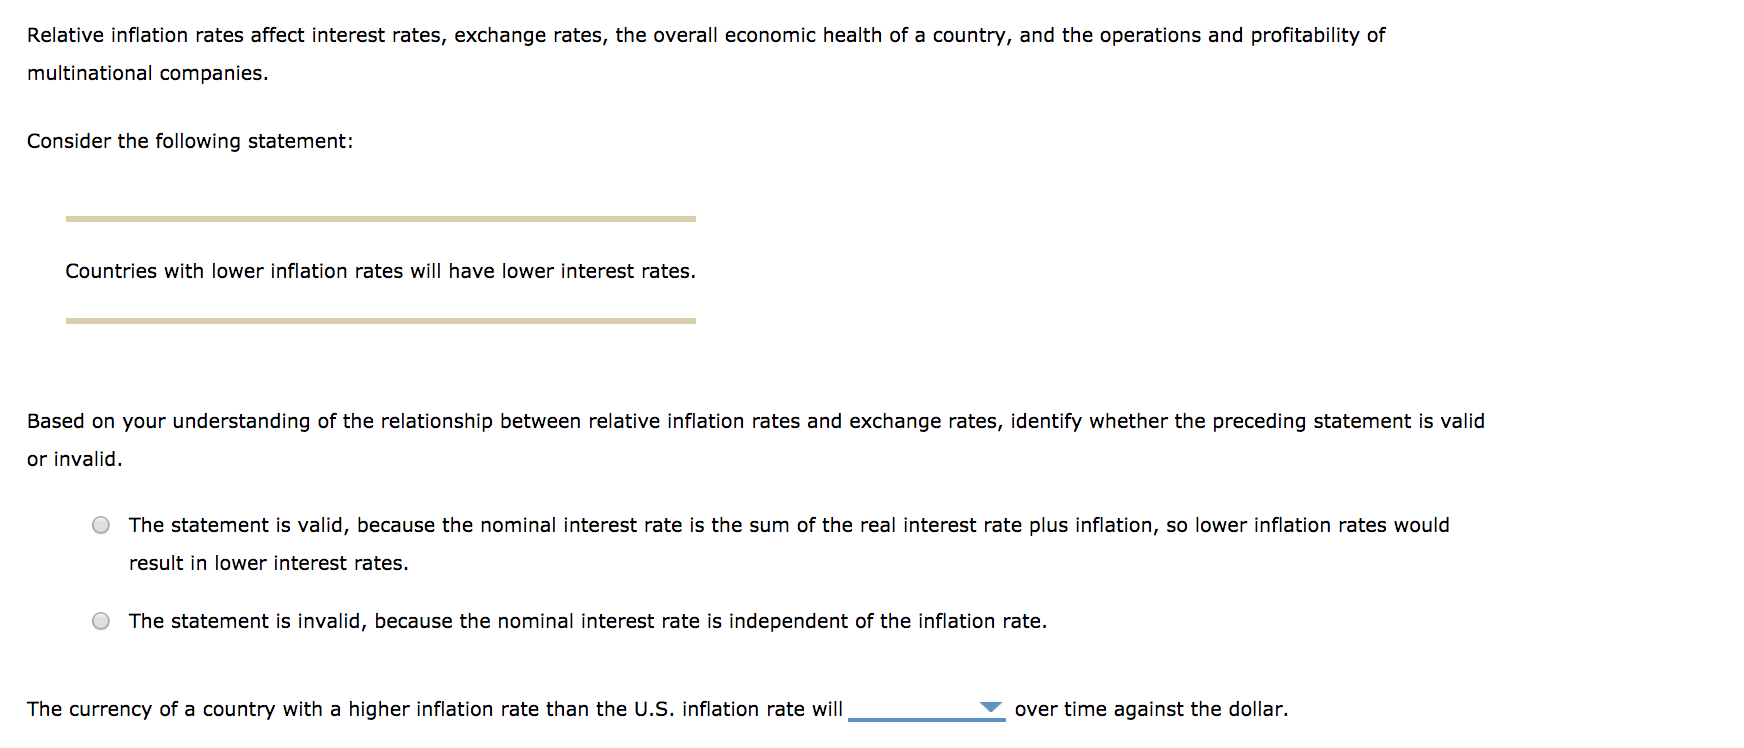 Relative inflation rates affect interest rates, exchange rates, the overall economic health of a country, and the operations and profitability of
multinational companies.
Consider the following statement:
Countries with lower inflation rates will have lower interest rates.
Based on your understanding of the relationship between relative inflation rates and exchange rates, identify whether the preceding statement is valid
or invalid.
O The statement is valid, because the nominal interest rate is the sum of the real interest rate plus inflation, so lower inflation rates would
result in lower interest rates
O The statement is invalid, because the nominal interest rate is independent of the inflation rate.
The currency of a country with a higher inflation rate than the U.S. inflation rate will
over time against the dollar.
